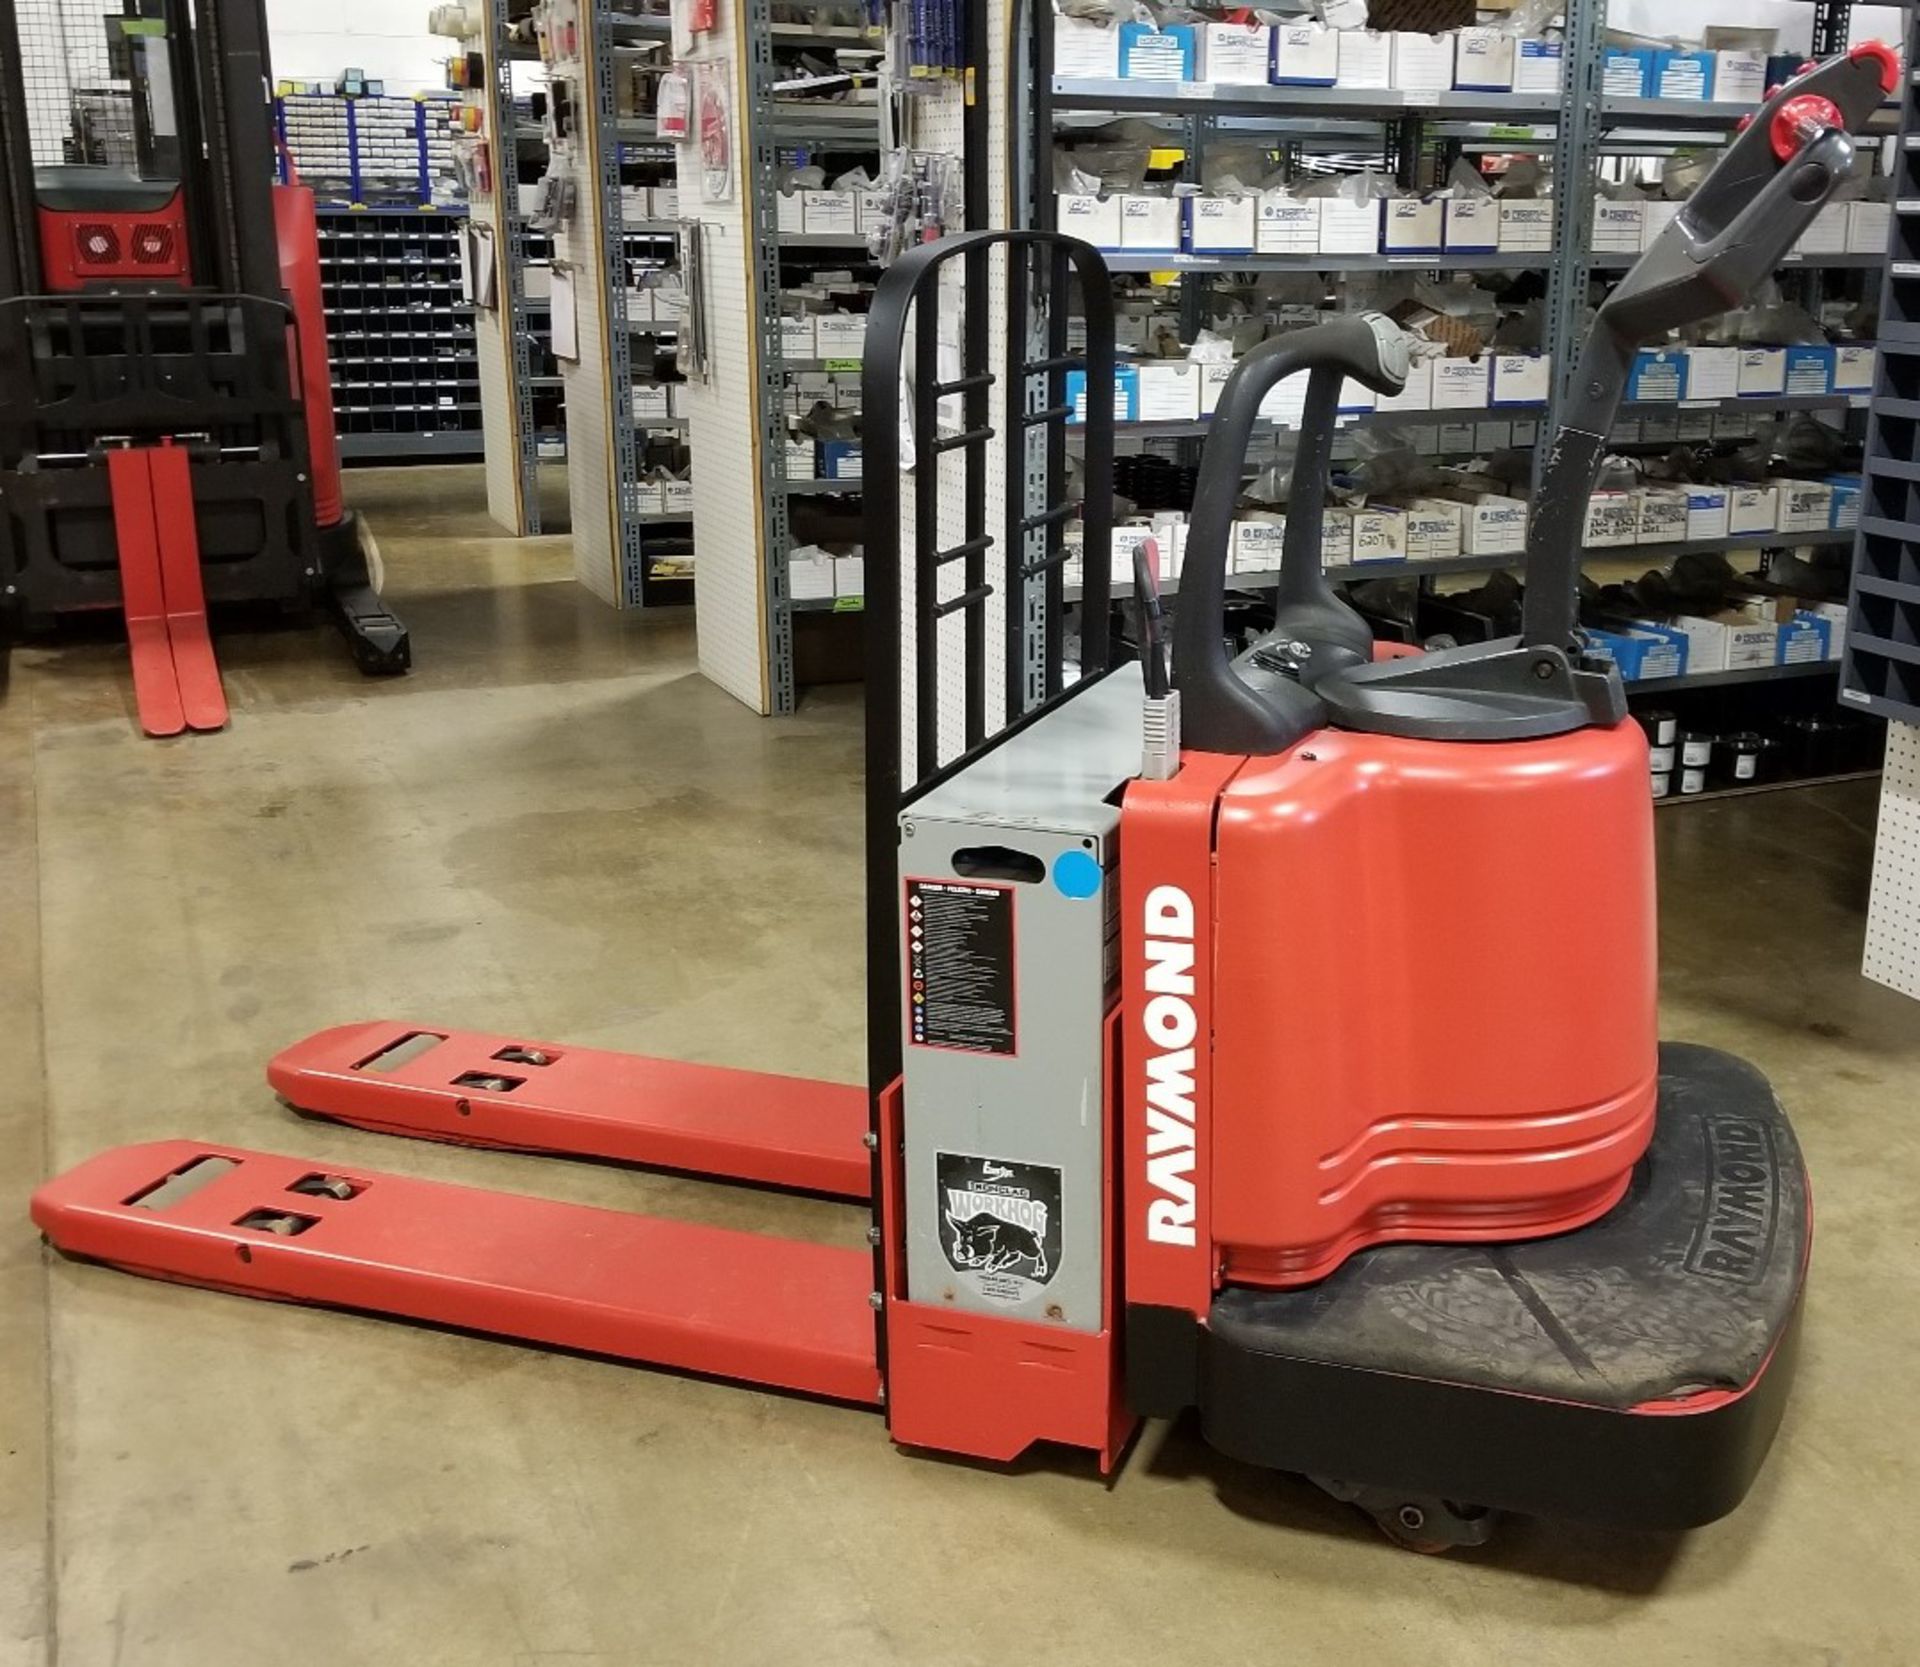 RAYMOND (2005) 112TM-FRE60L 24V ELECTRIC RIDE-ON PALLET JACK WITH 6000 LB. CAPACITY, S/N: 112-04-